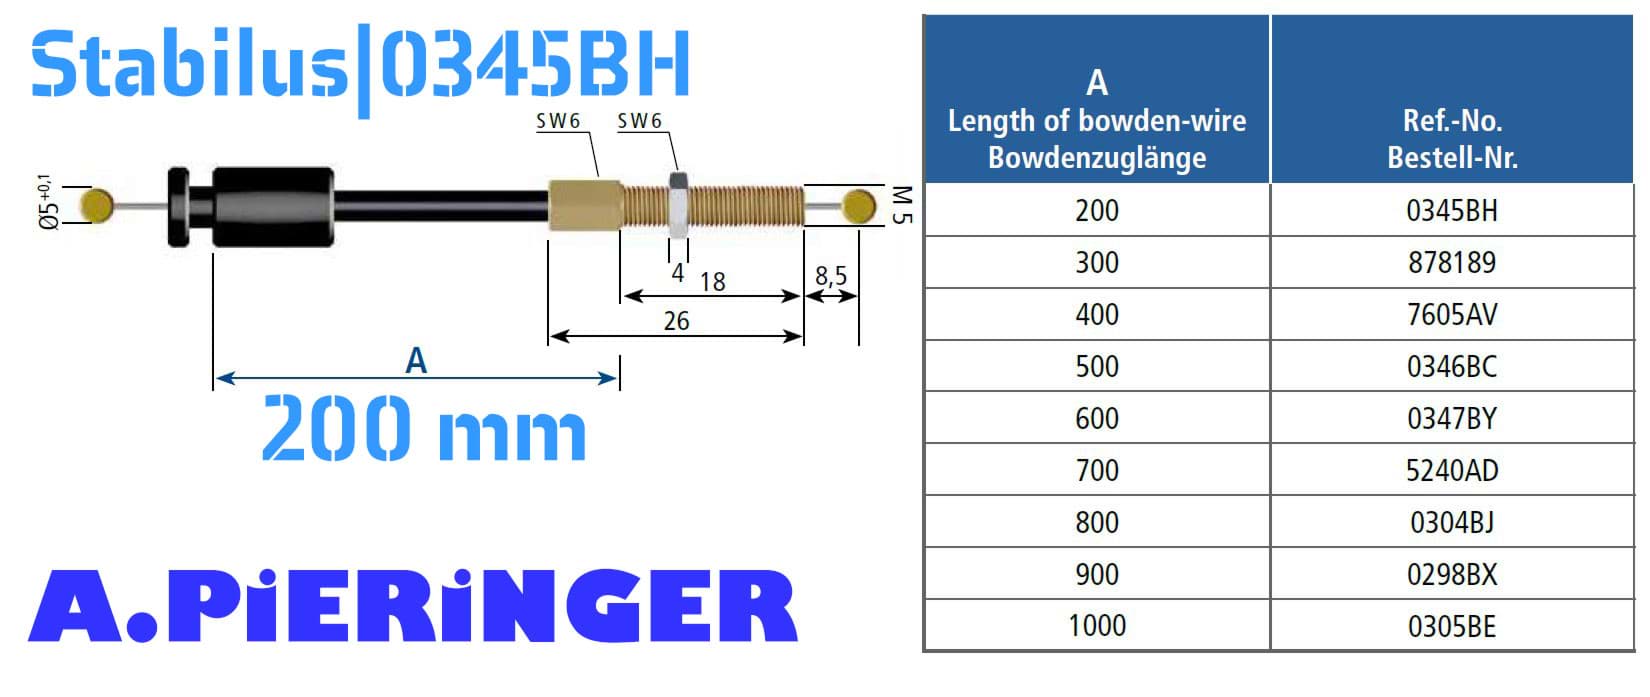 Picture of Stabilus 0345BH BOWDENZUGN 200 lang